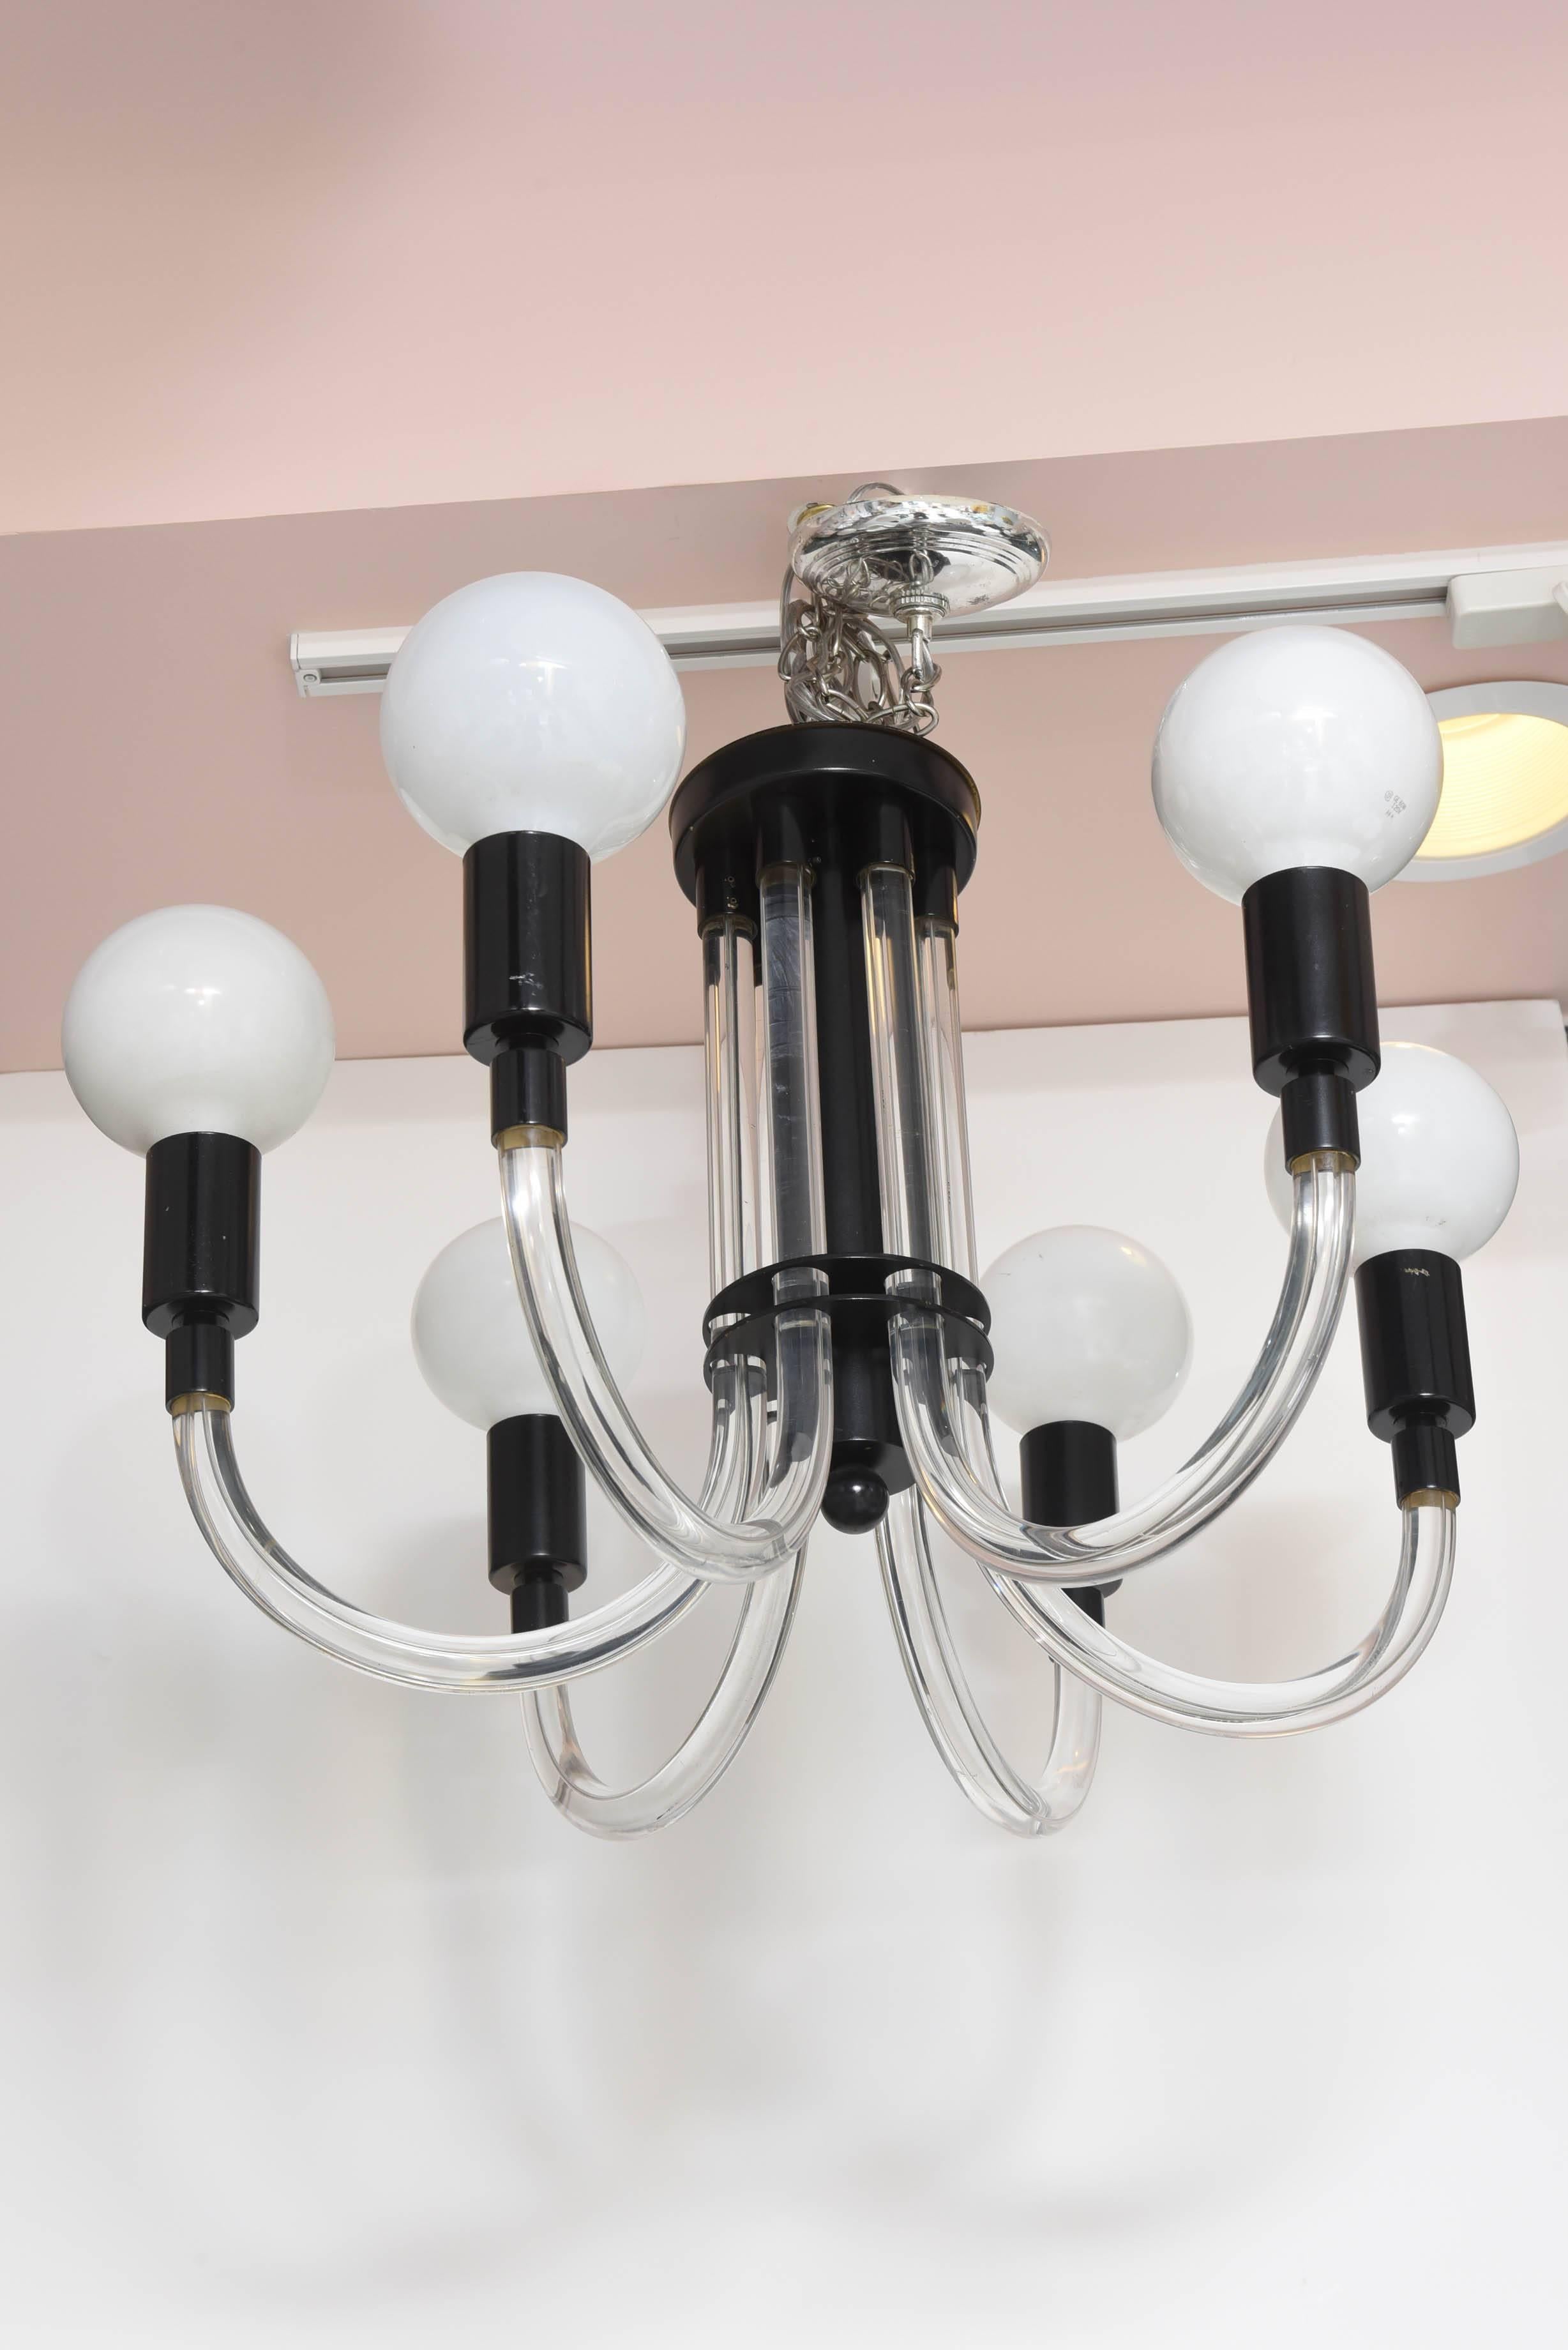 Bulbs can be customed.
Measurement given is for fixture only (not the chain). Black and clear Lucite.